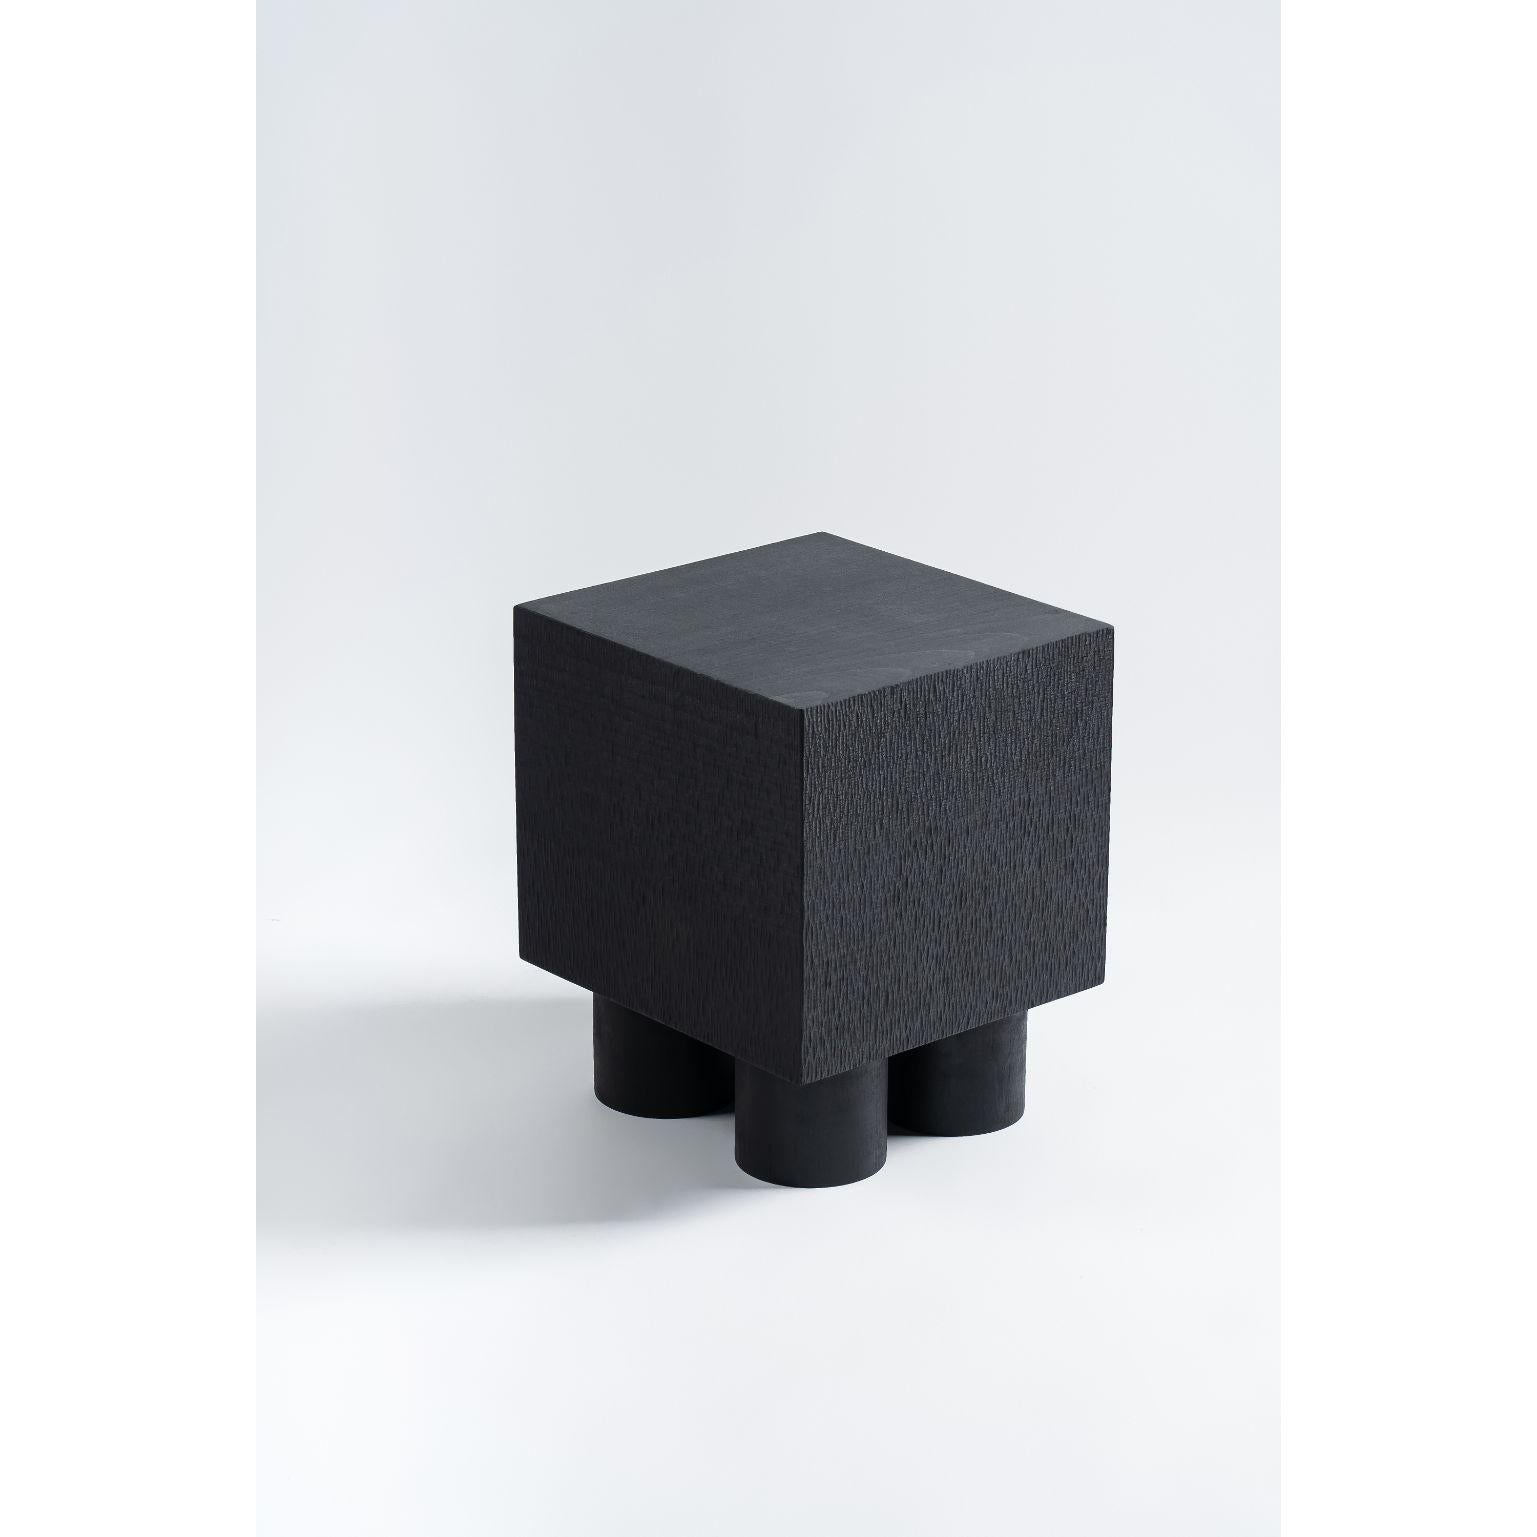 Time of Action No. 20-2 by Chaeyoung Lee
Materials: Ebonized and carved wood
Dimensions: 34,5 x 32 x 41 cm

Time of Action is a minimal and carefully crafted furniture collection created by South Korean-based designer Chaeyoung Lee.
Time of